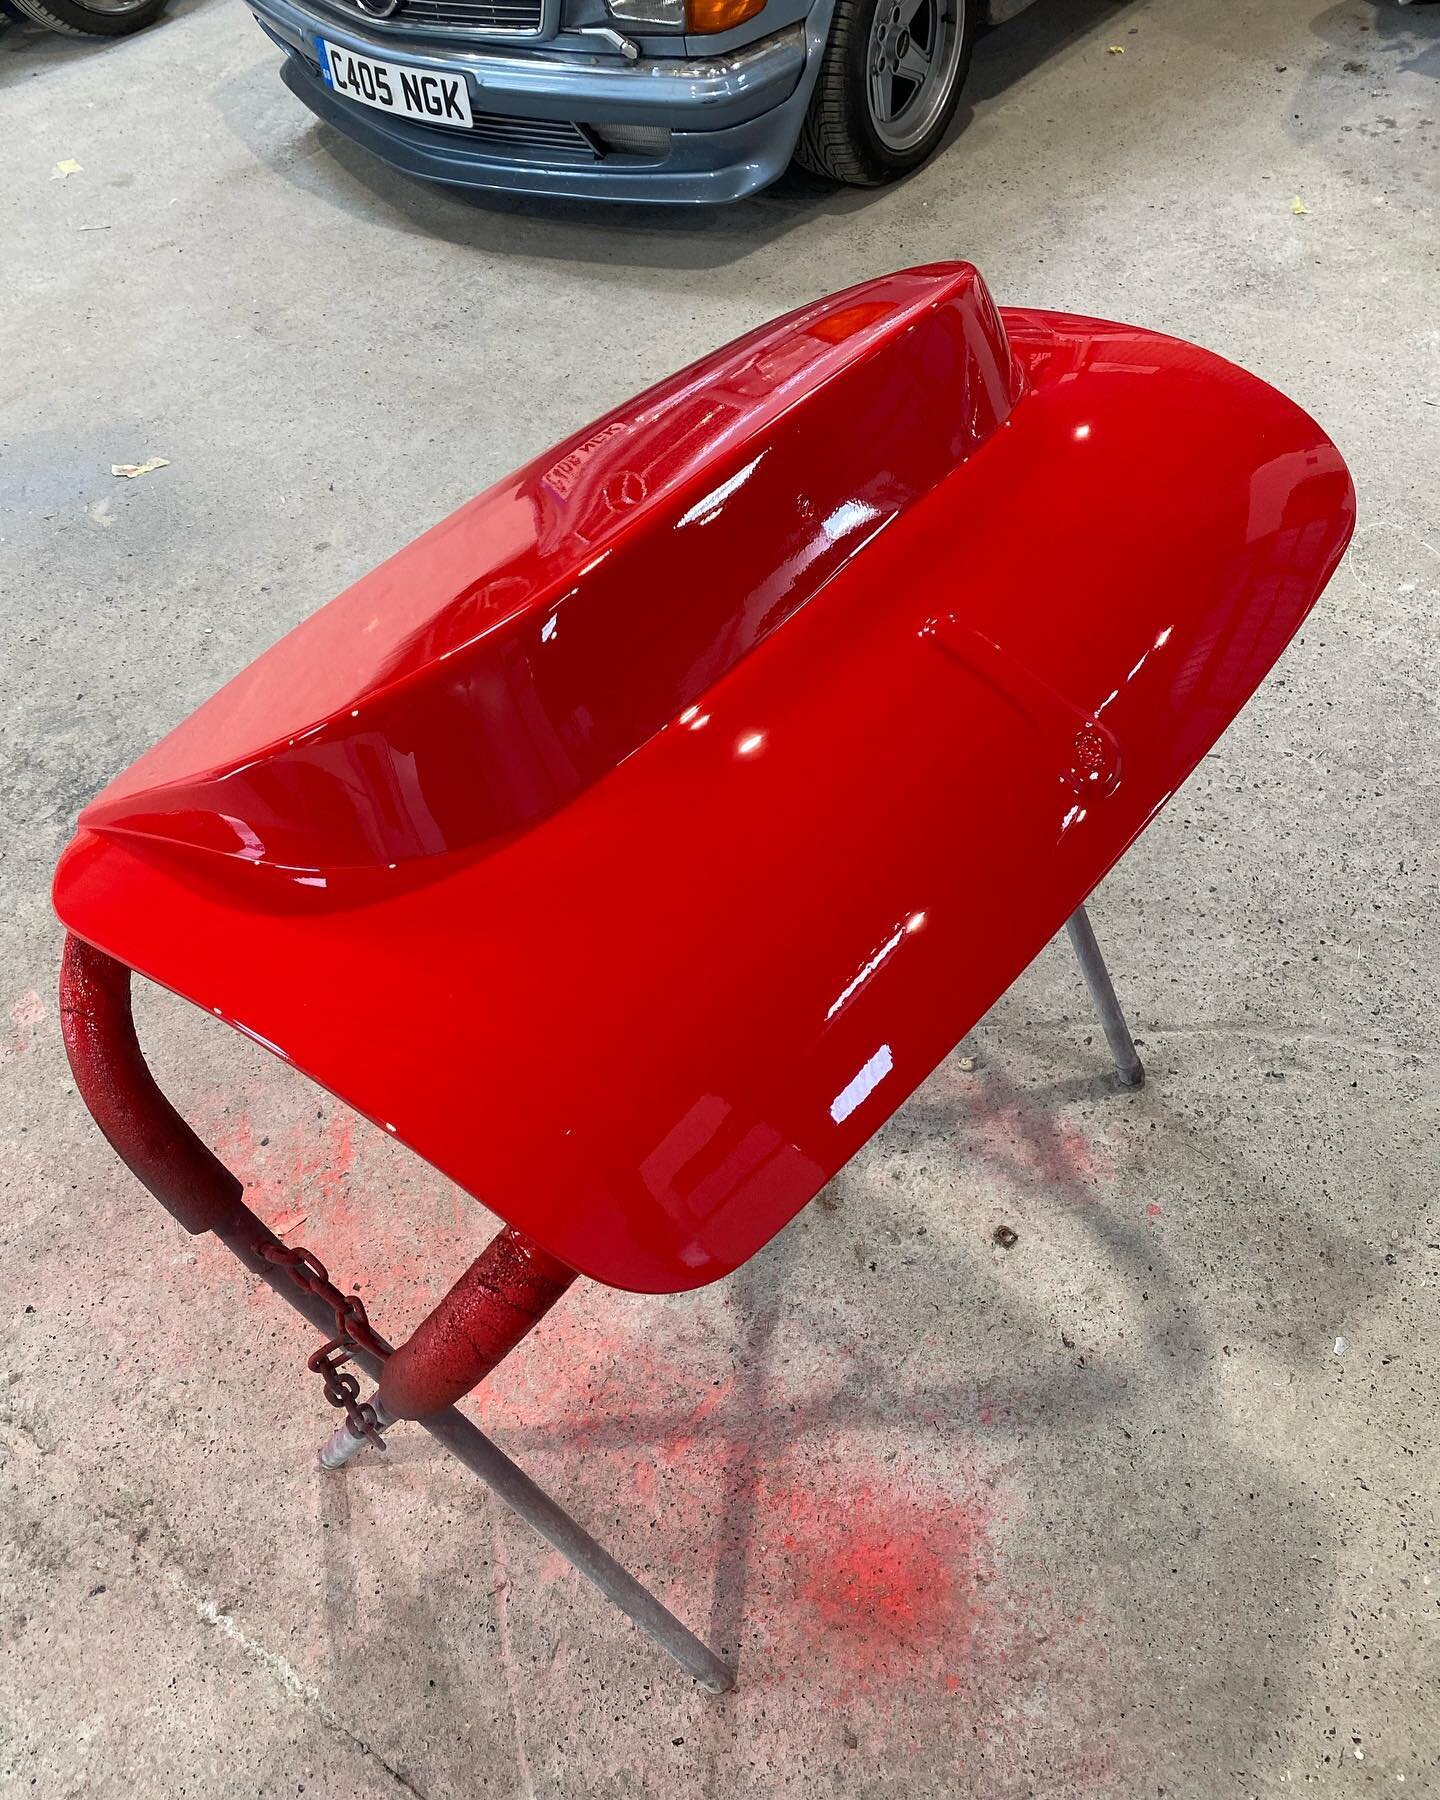 Finished up the competition bootlid on the #bighealey a few weeks ago. Toms first crack at painting on this, came out beautifully. @tomconrad_ 

Suits this ex #racecar #austinhealey perfectly, colour match is bang on. 

Such a characterful piece of #